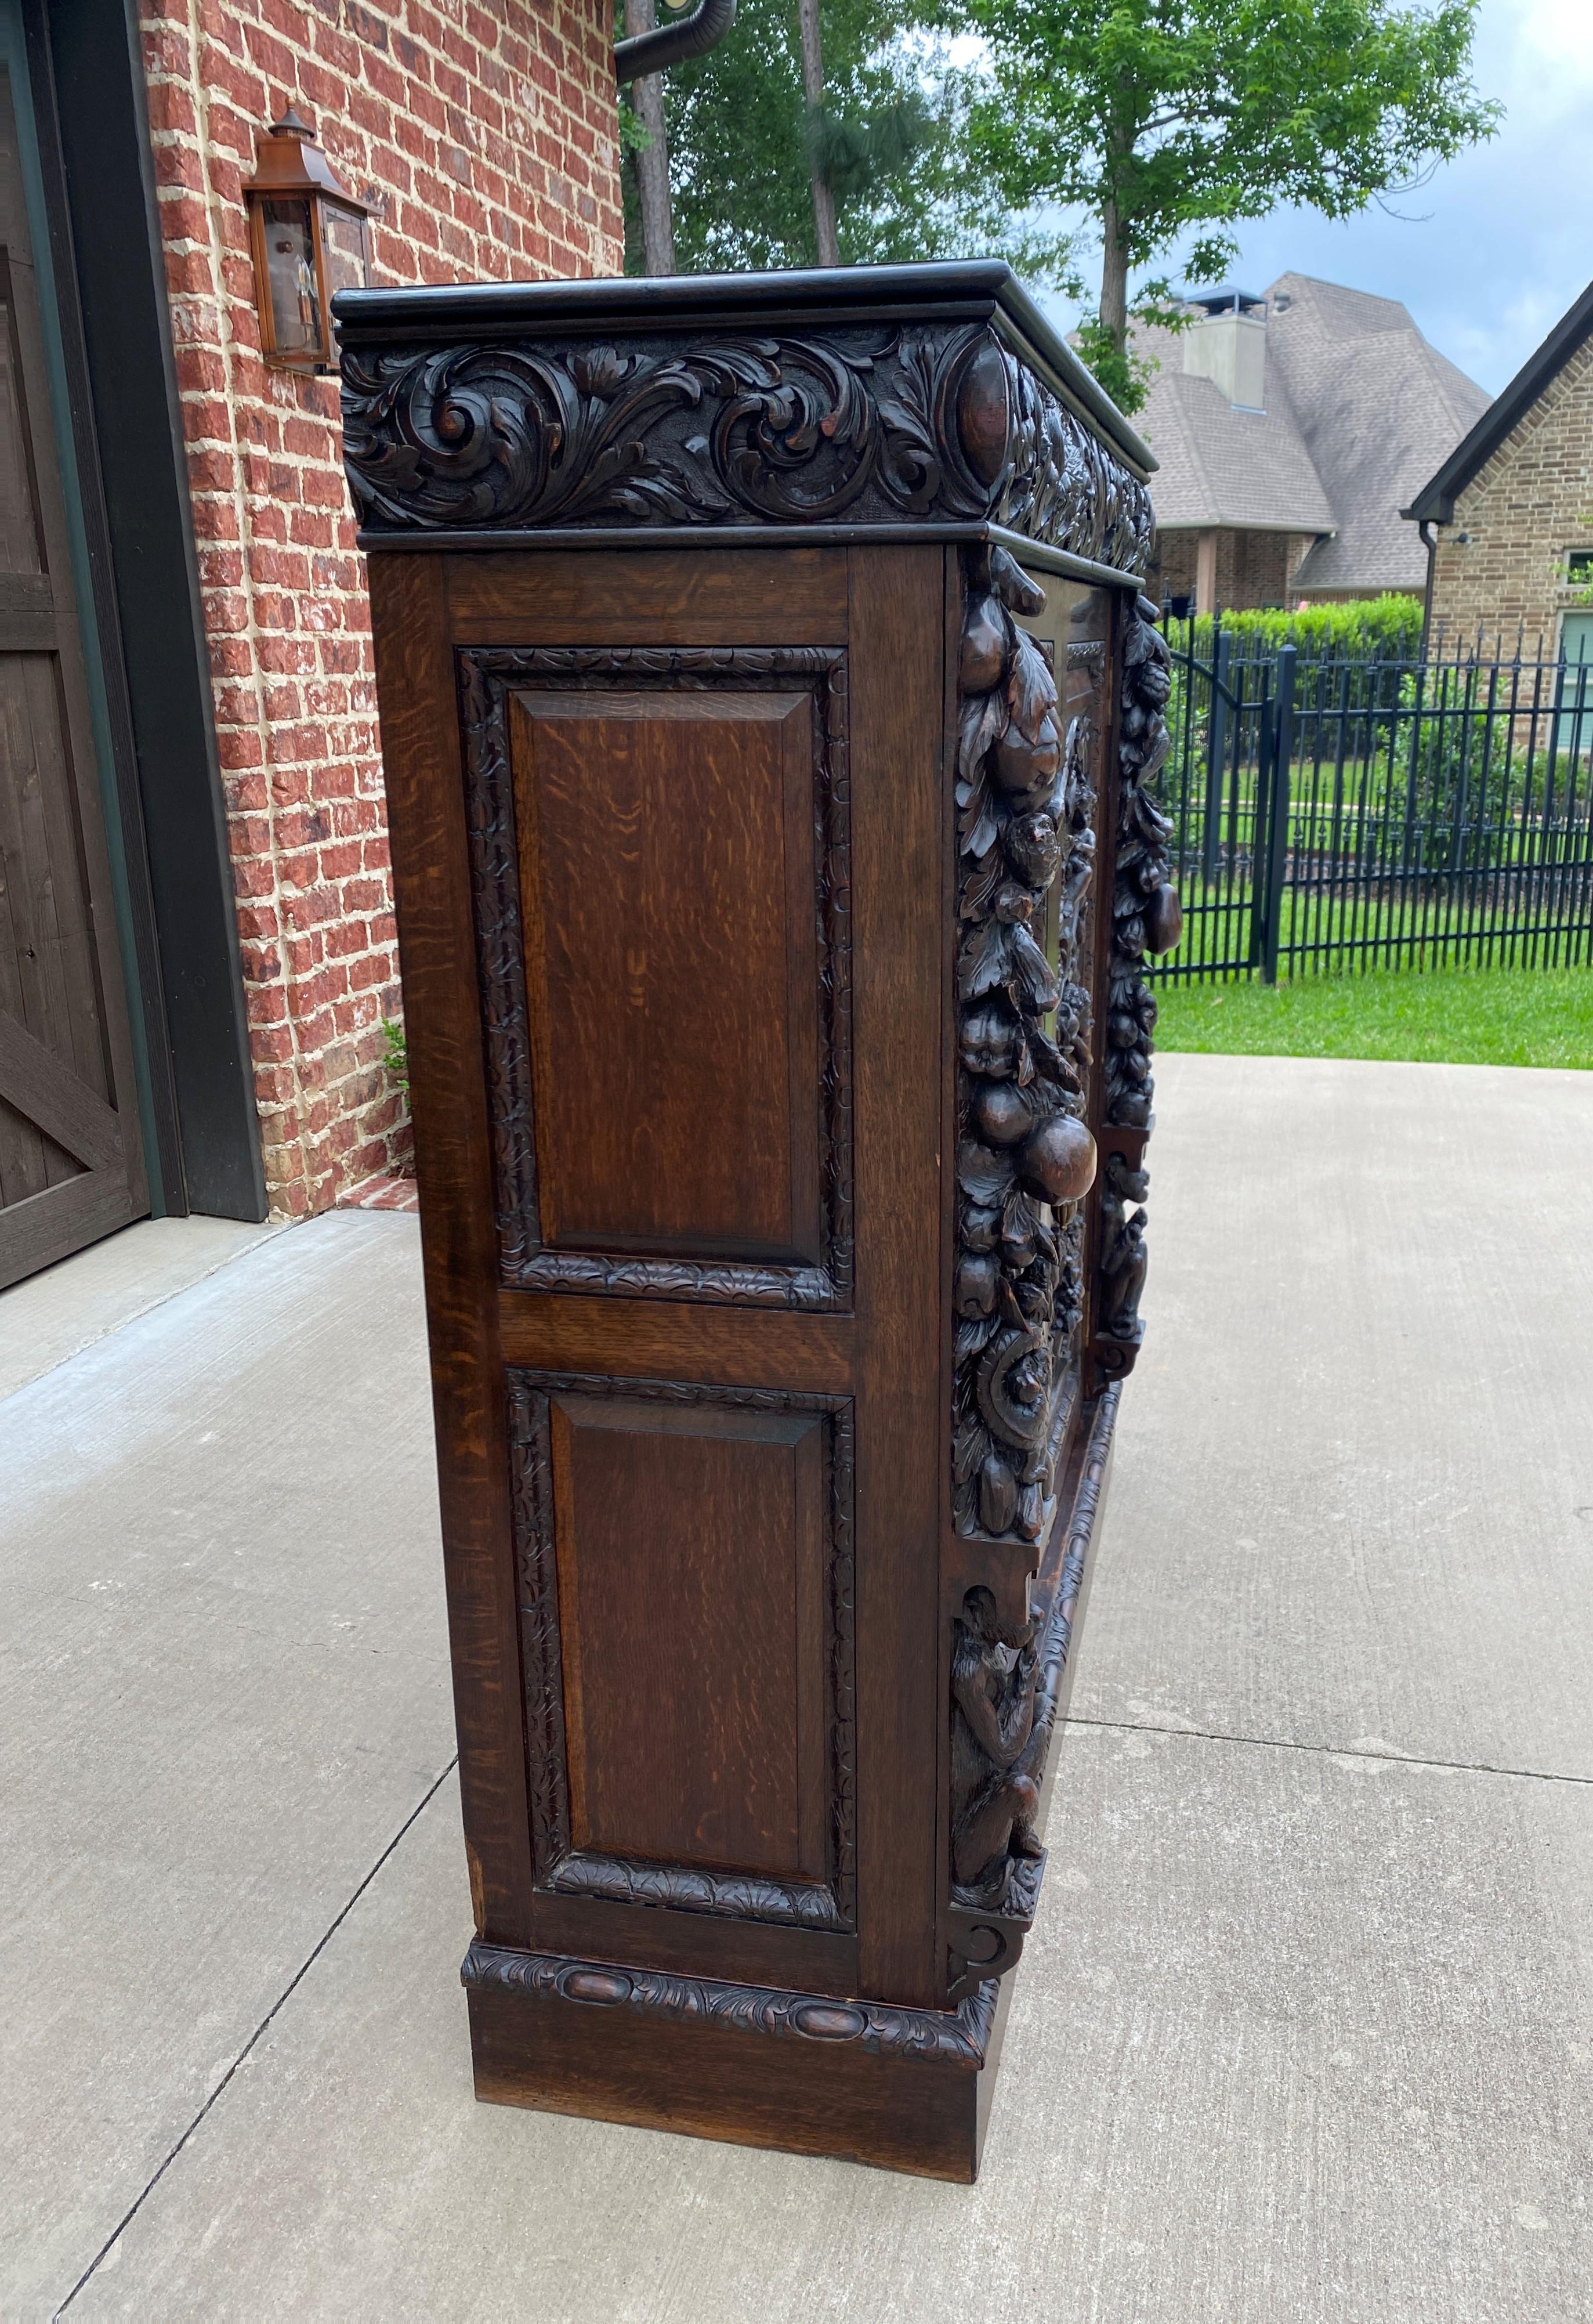 Antique English Cabinet Chest Wardrobe Gothic Revival Oak Monkeys Rare c.1880s In Good Condition For Sale In Tyler, TX